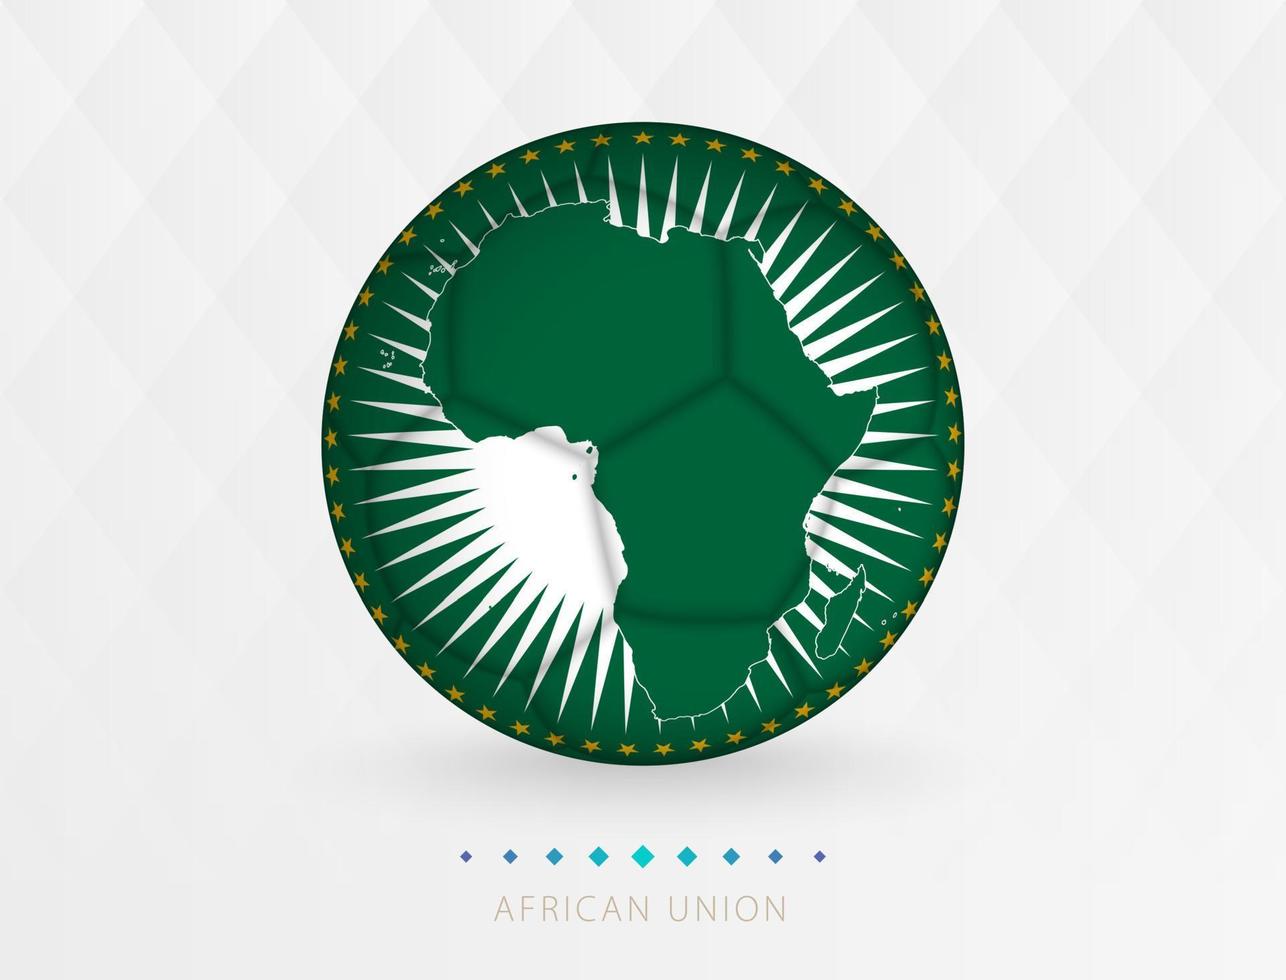 Football ball with African Union flag pattern, soccer ball with flag of African Union national team. vector